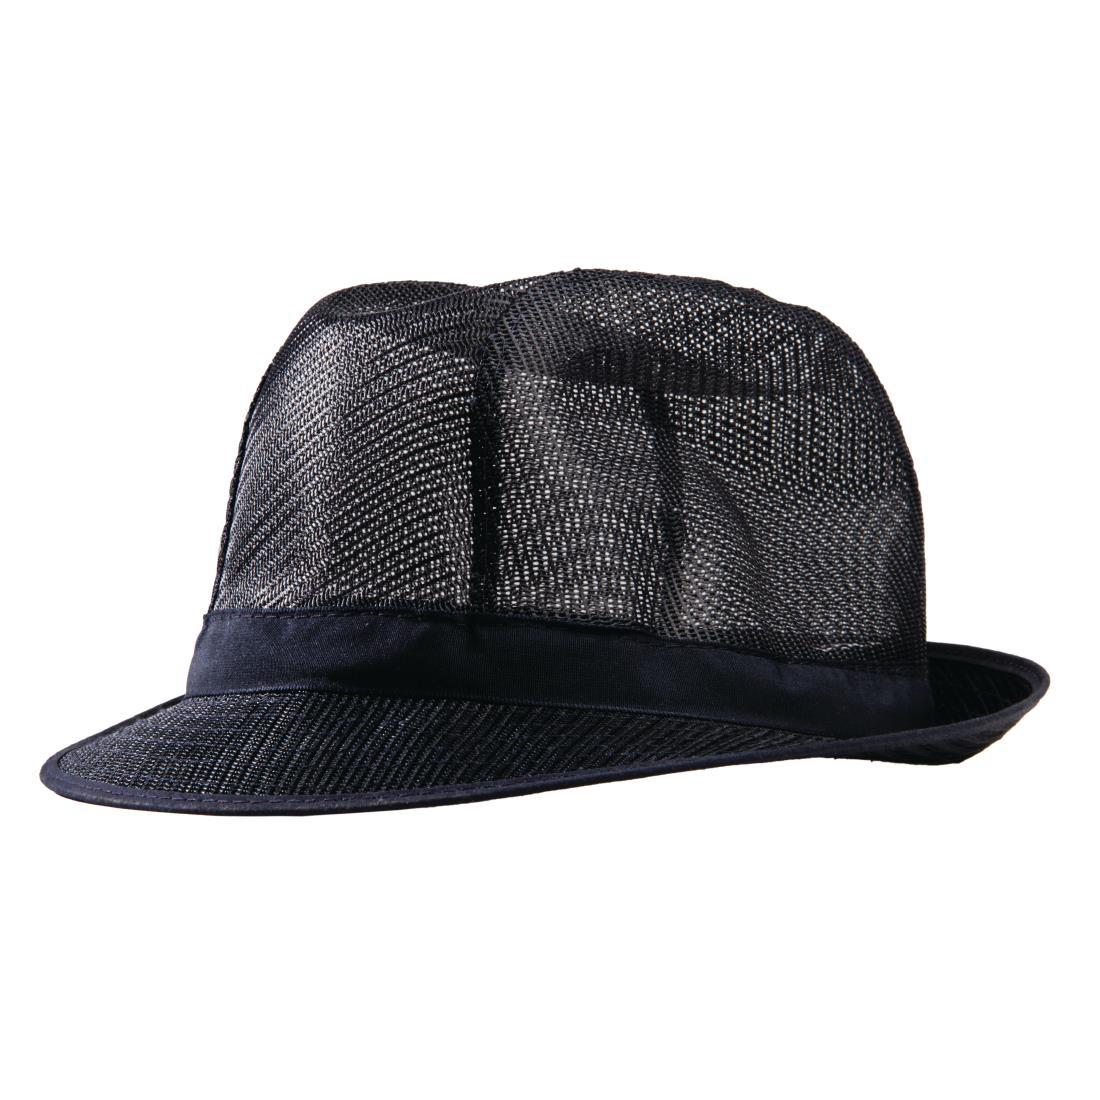 Trilby Hat with Snood Navy Blue L - A654-L  - 2